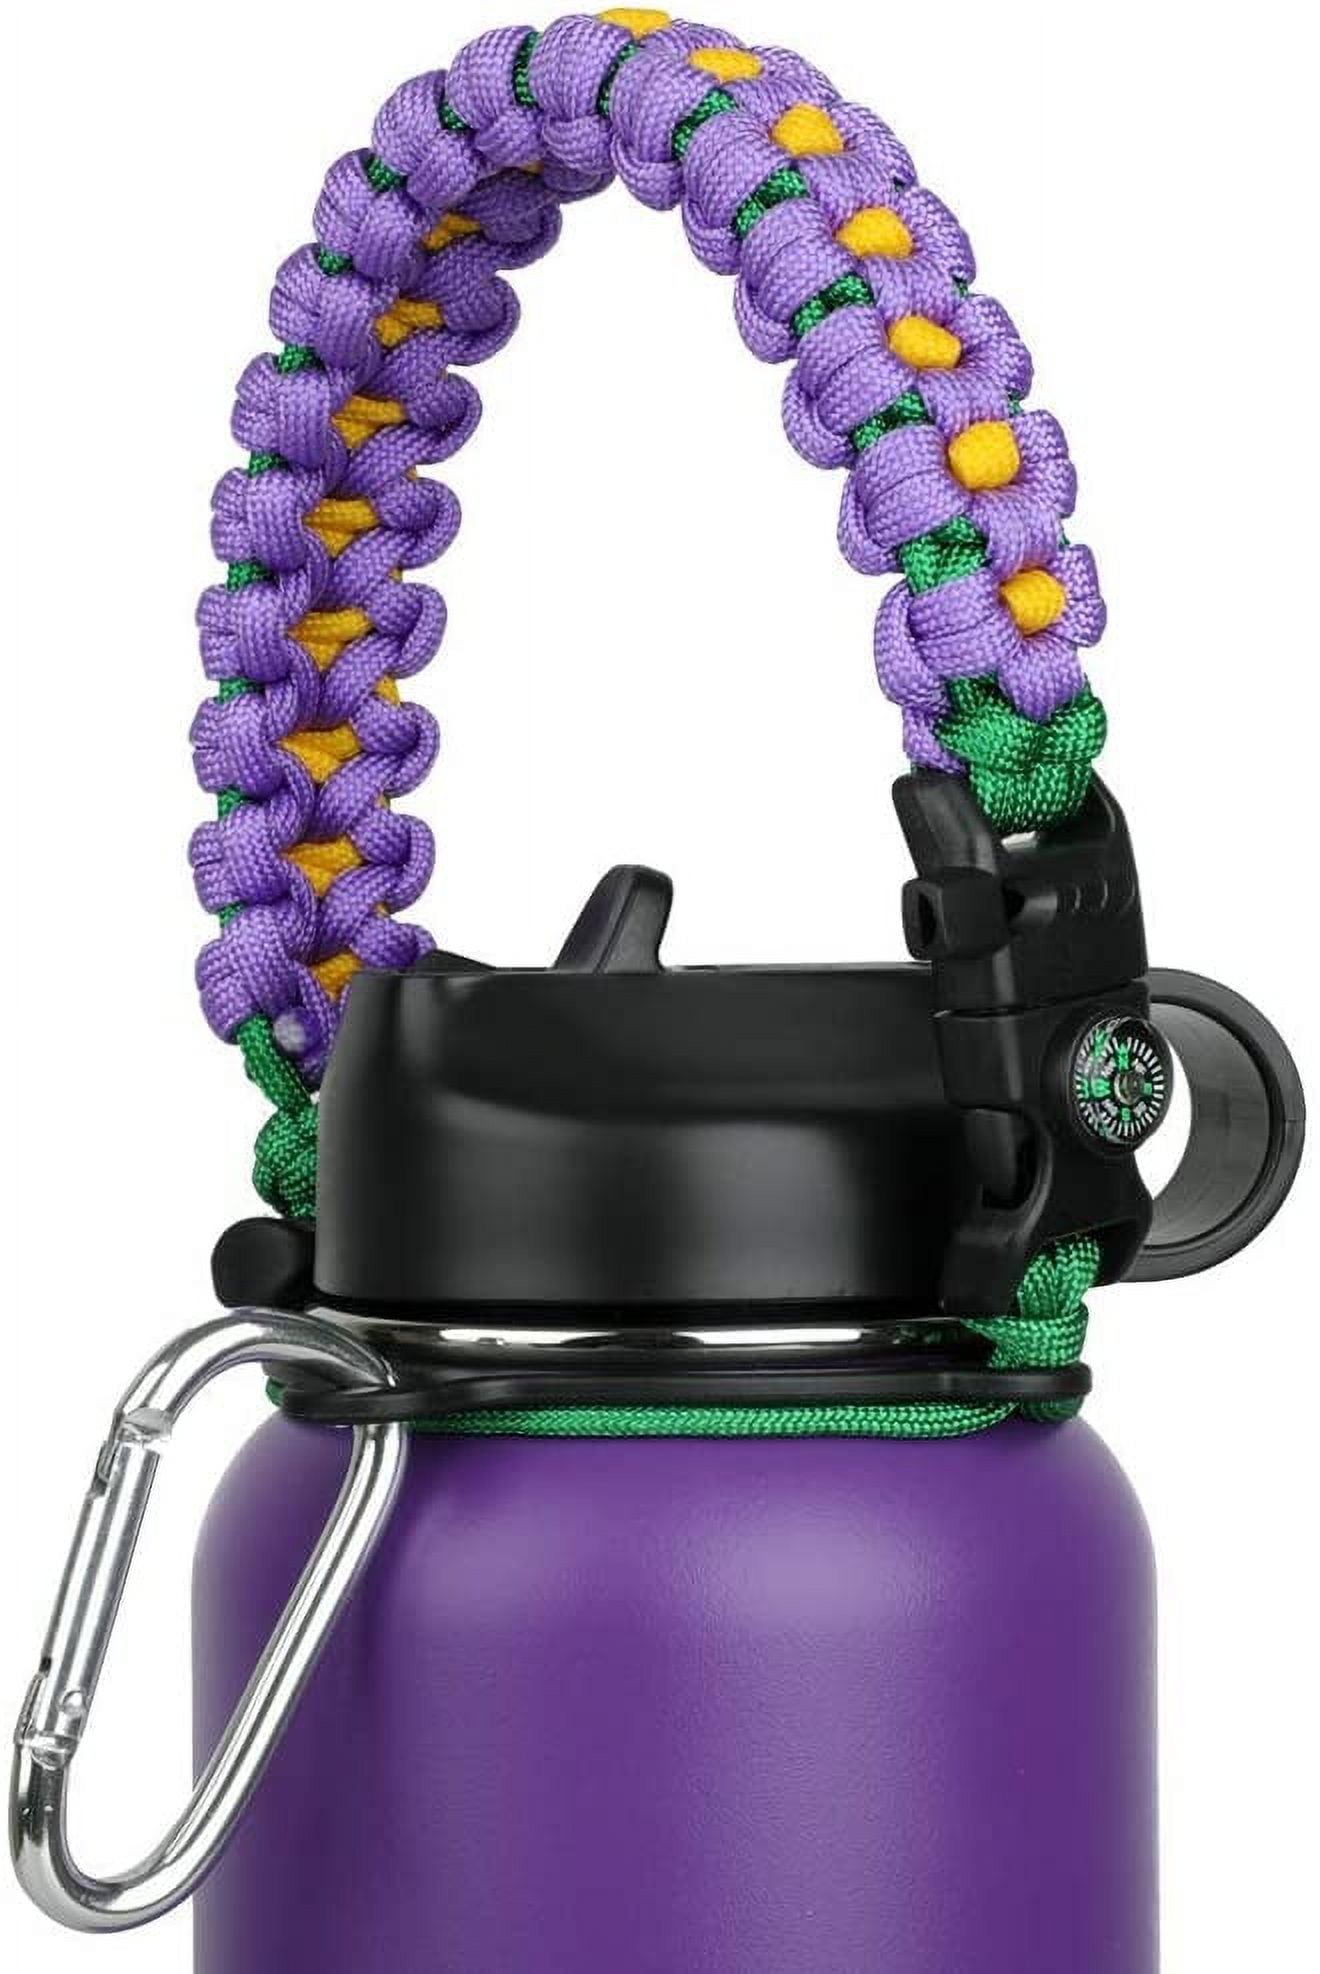 Wongeto Paracord Handle- Survival Strap Cord with Safety Ring and Carabiner  - Compatible with Hydro Flask Wide Mouth Water Bottles 12oz - 64 oz Sport